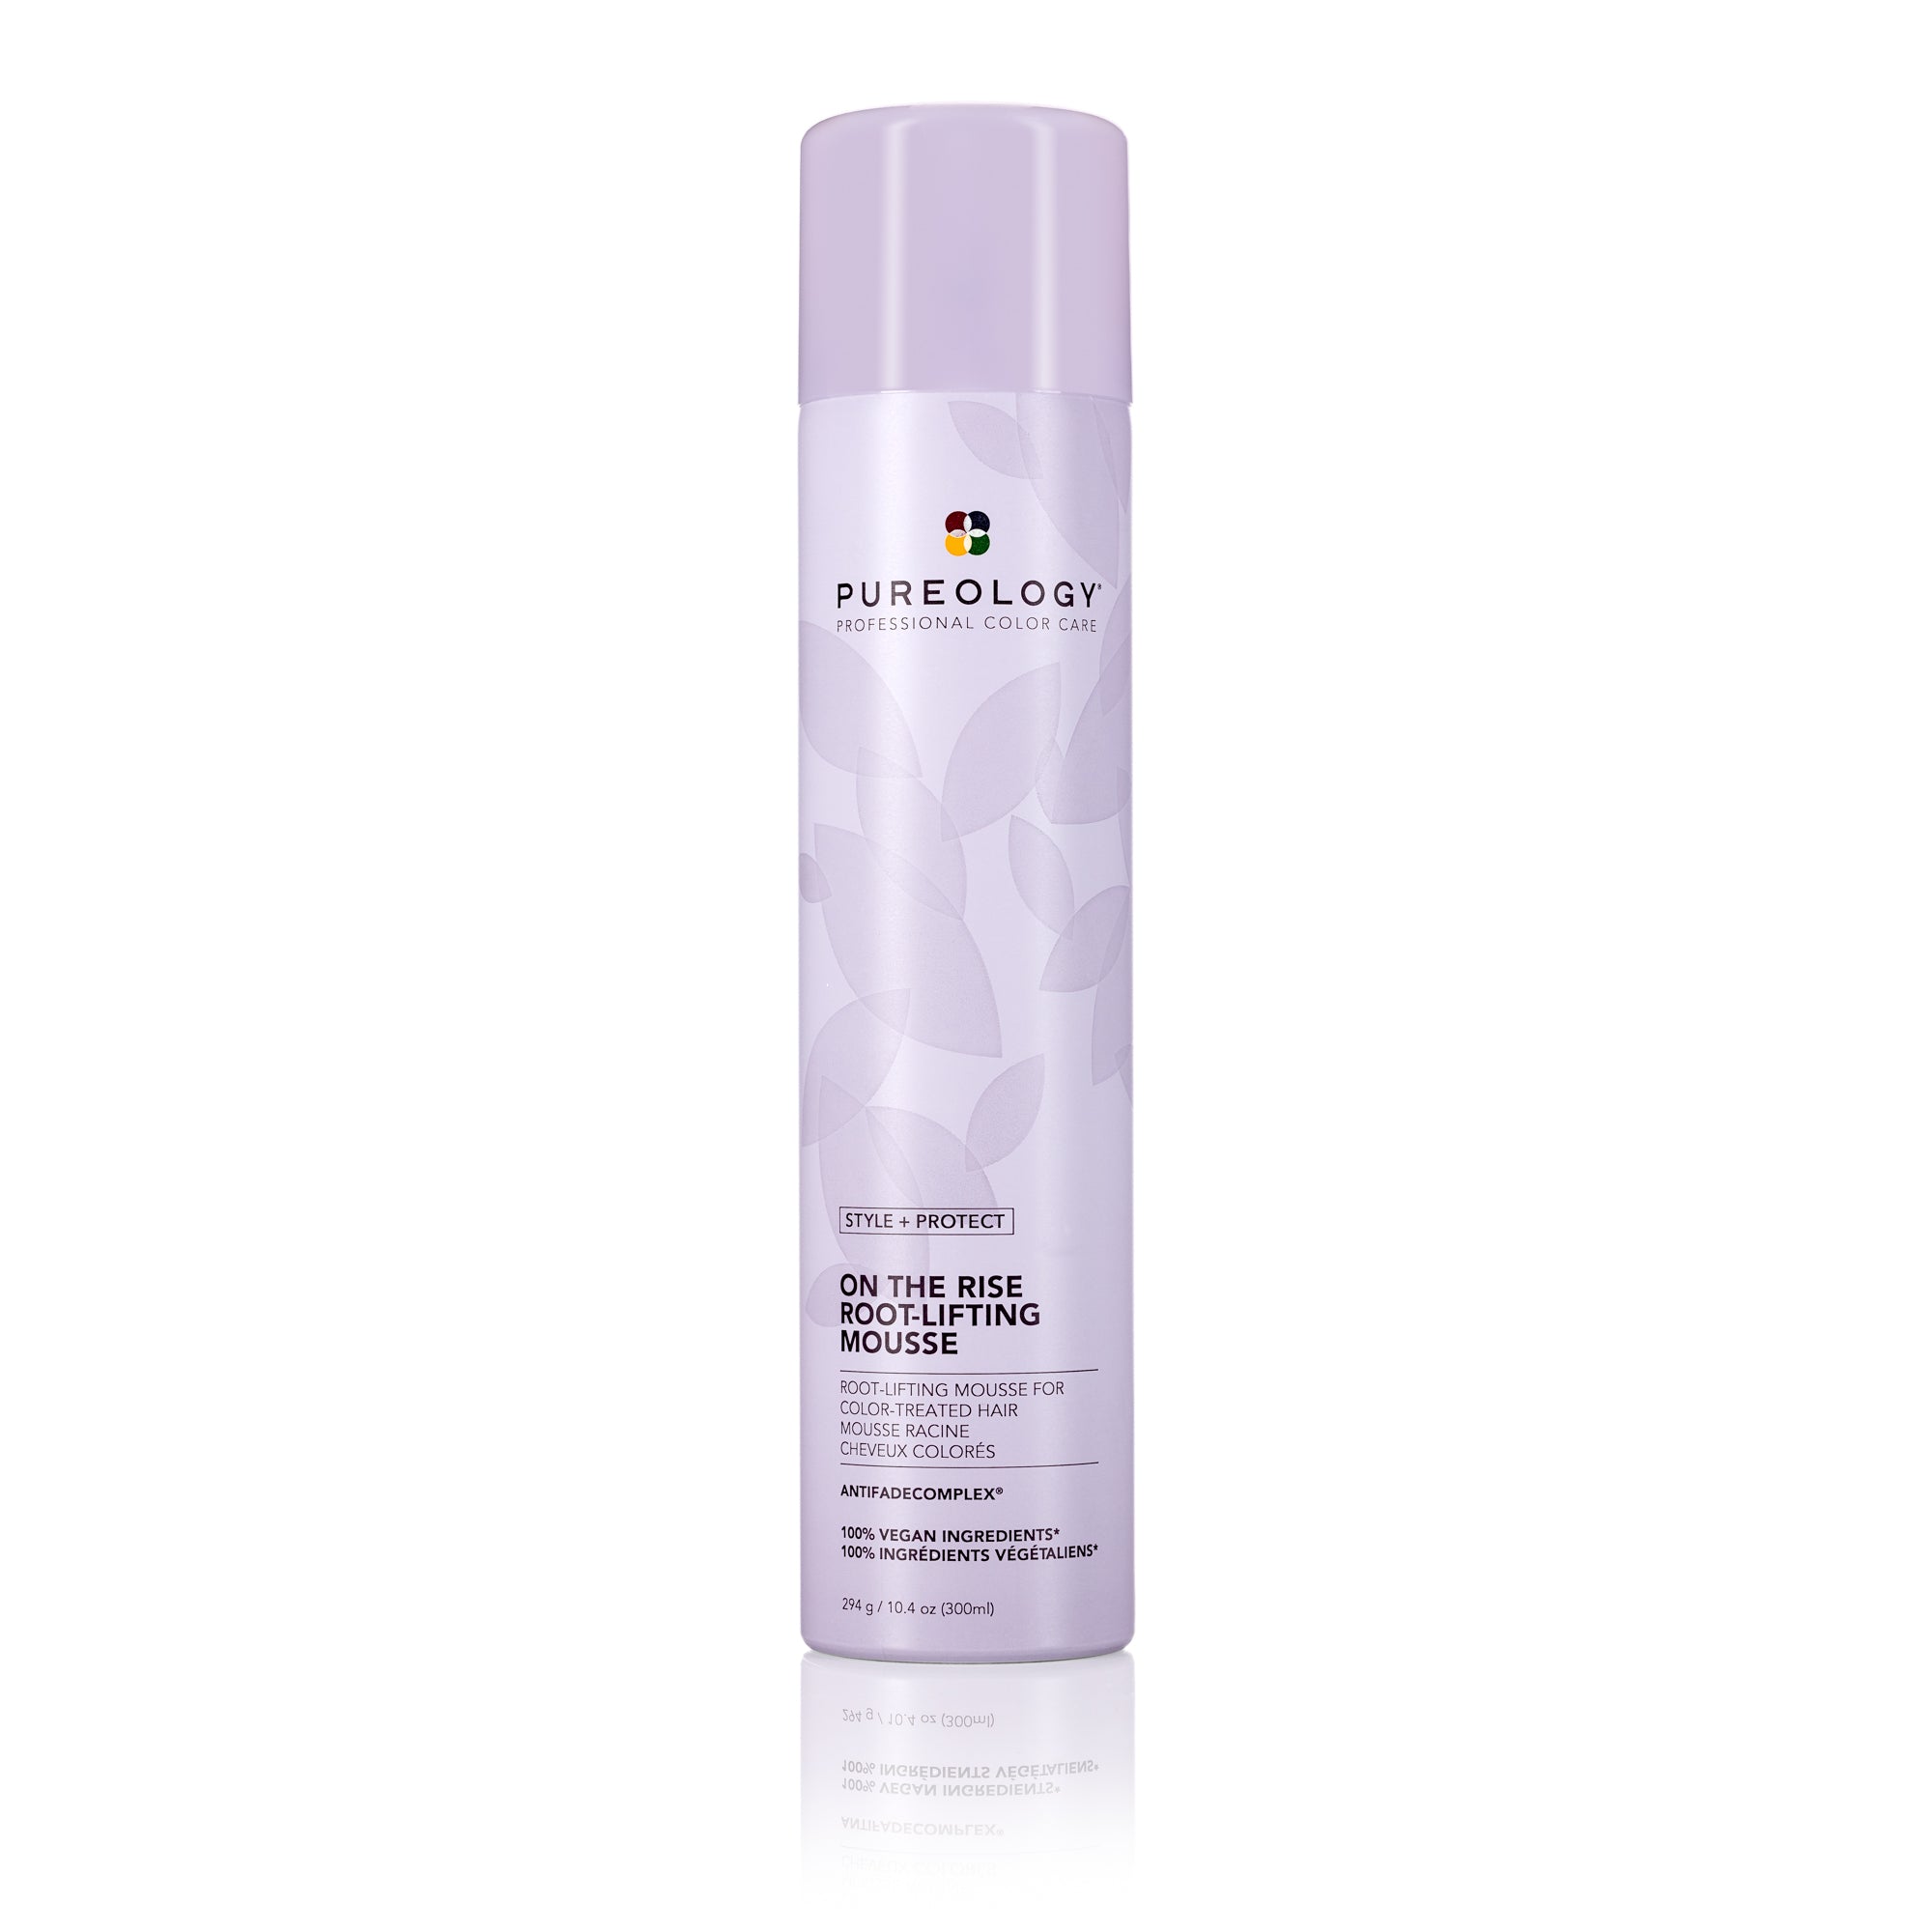 Baxter of California Thickening Smoothing Gel for hair